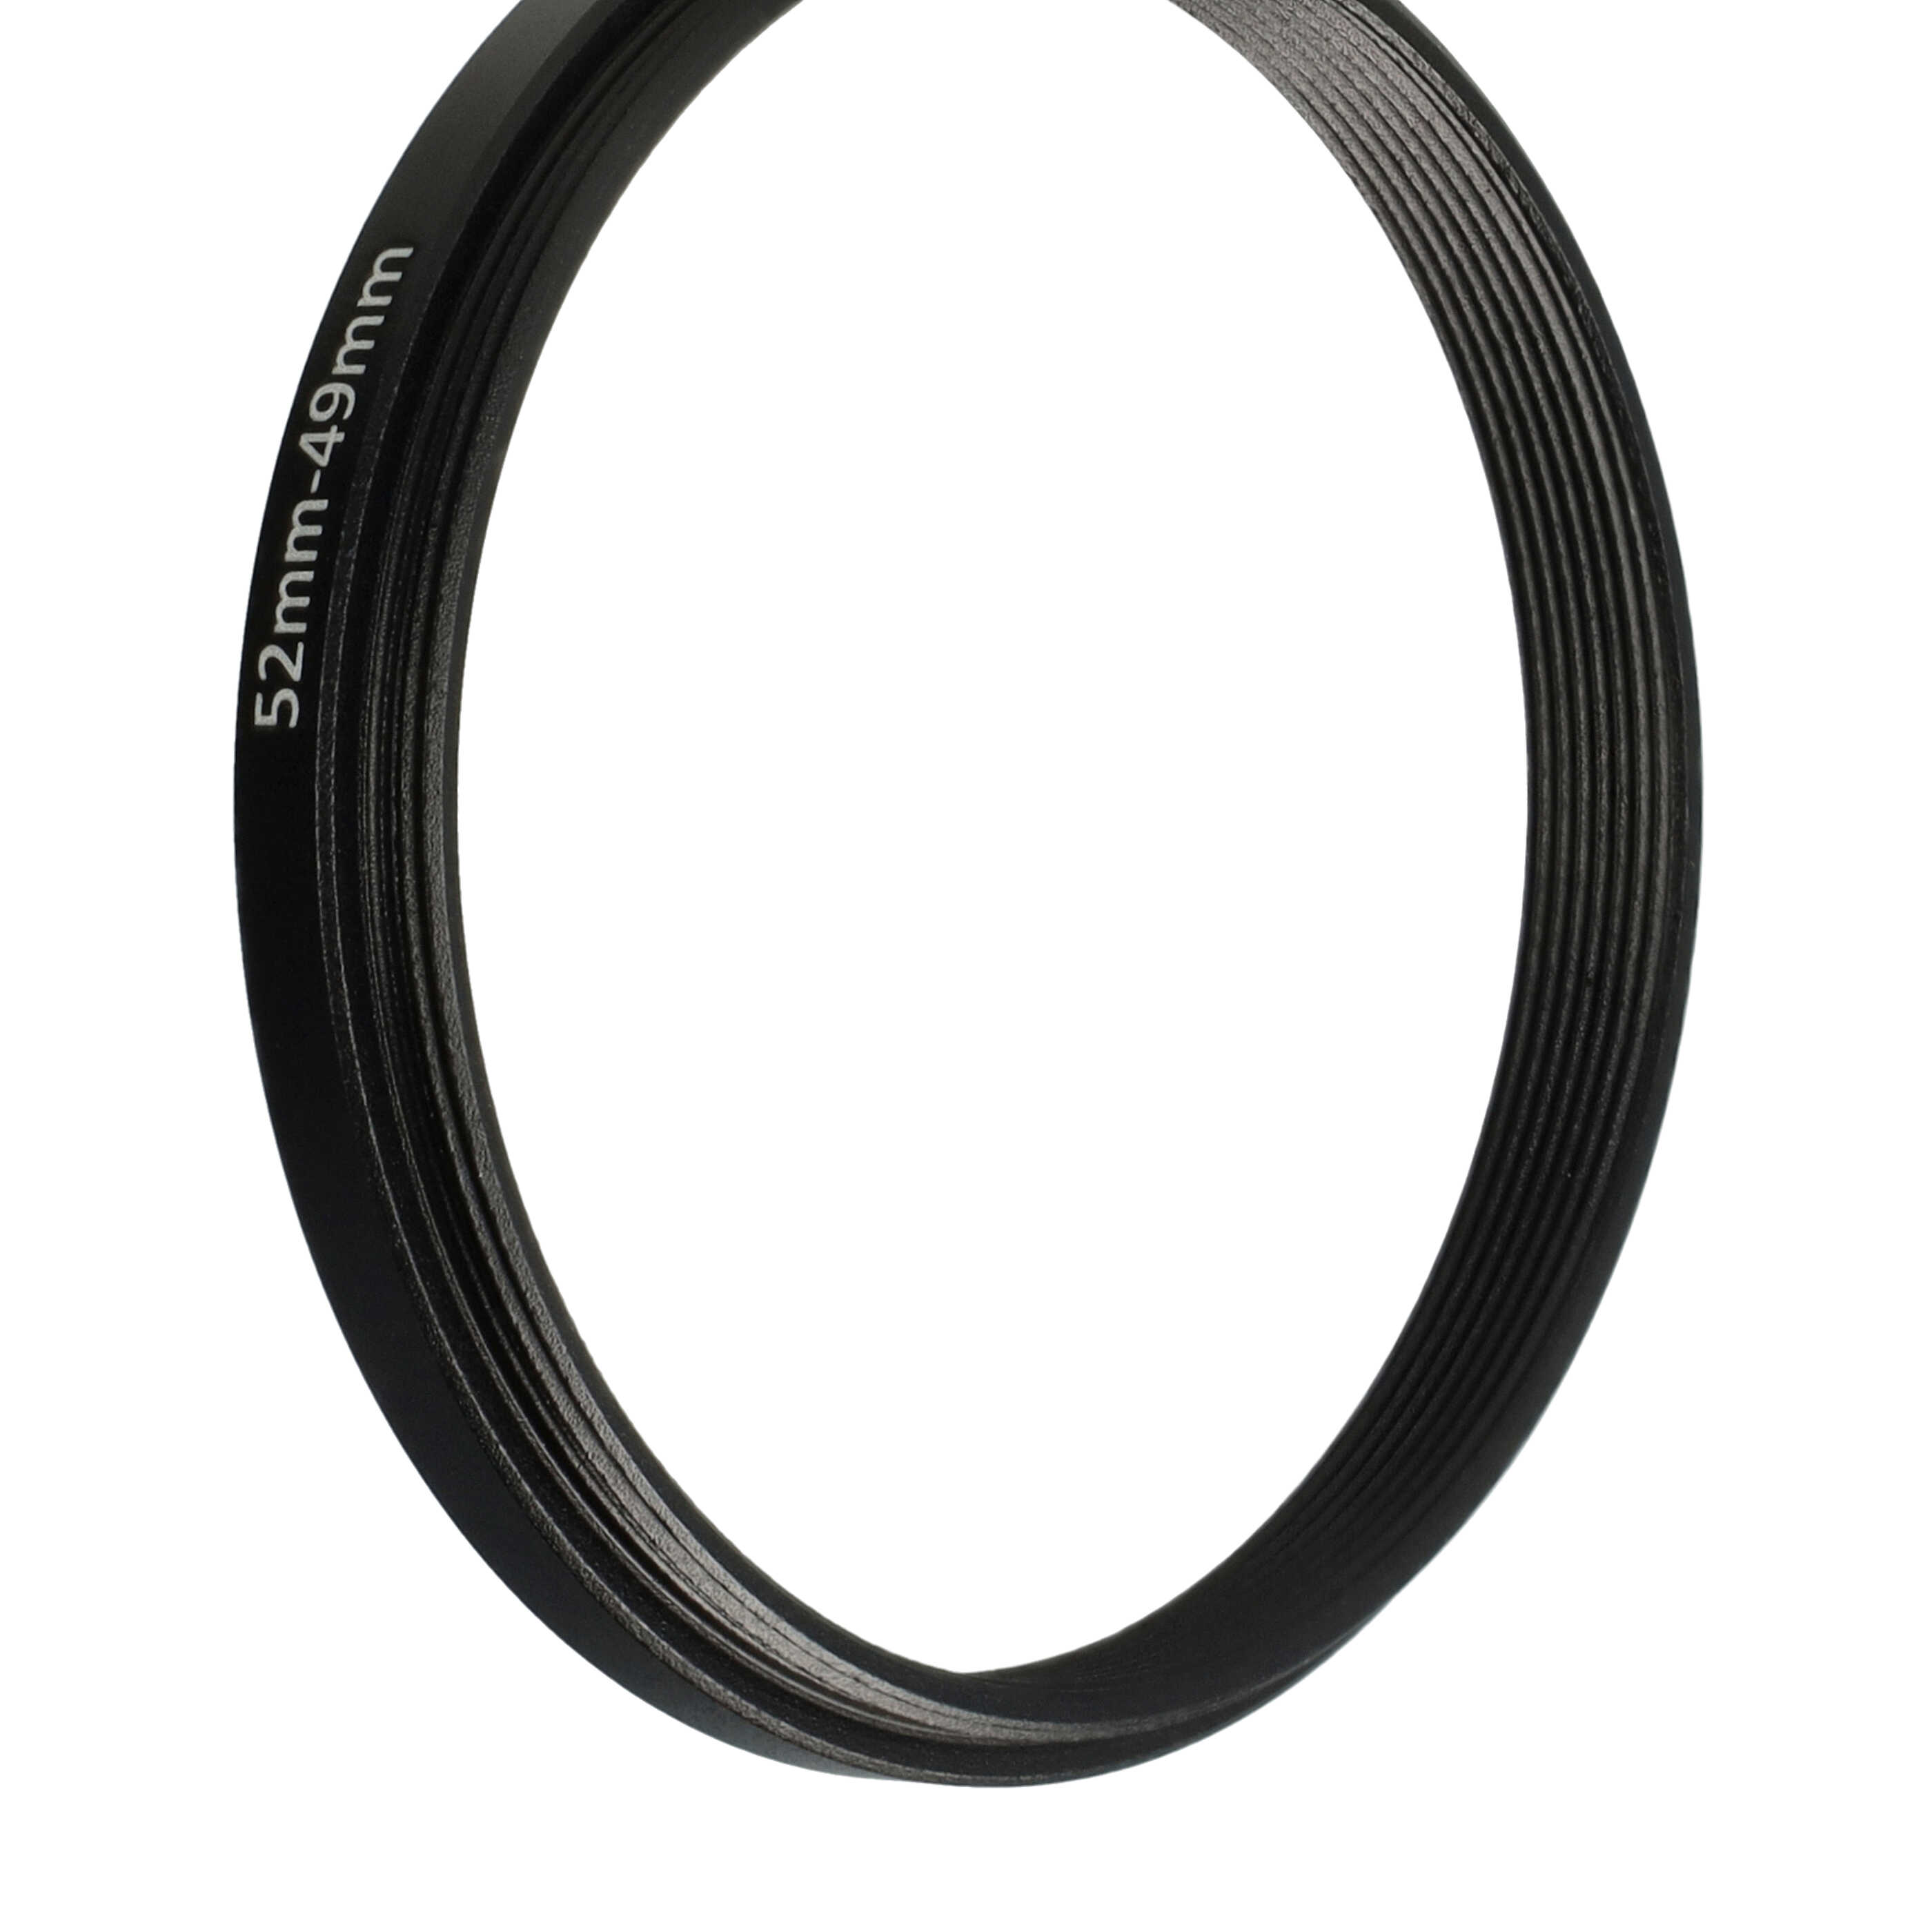 Step-Down Ring Adapter from 52 mm to 49 mm suitable for Camera Lens - Filter Adapter, metal